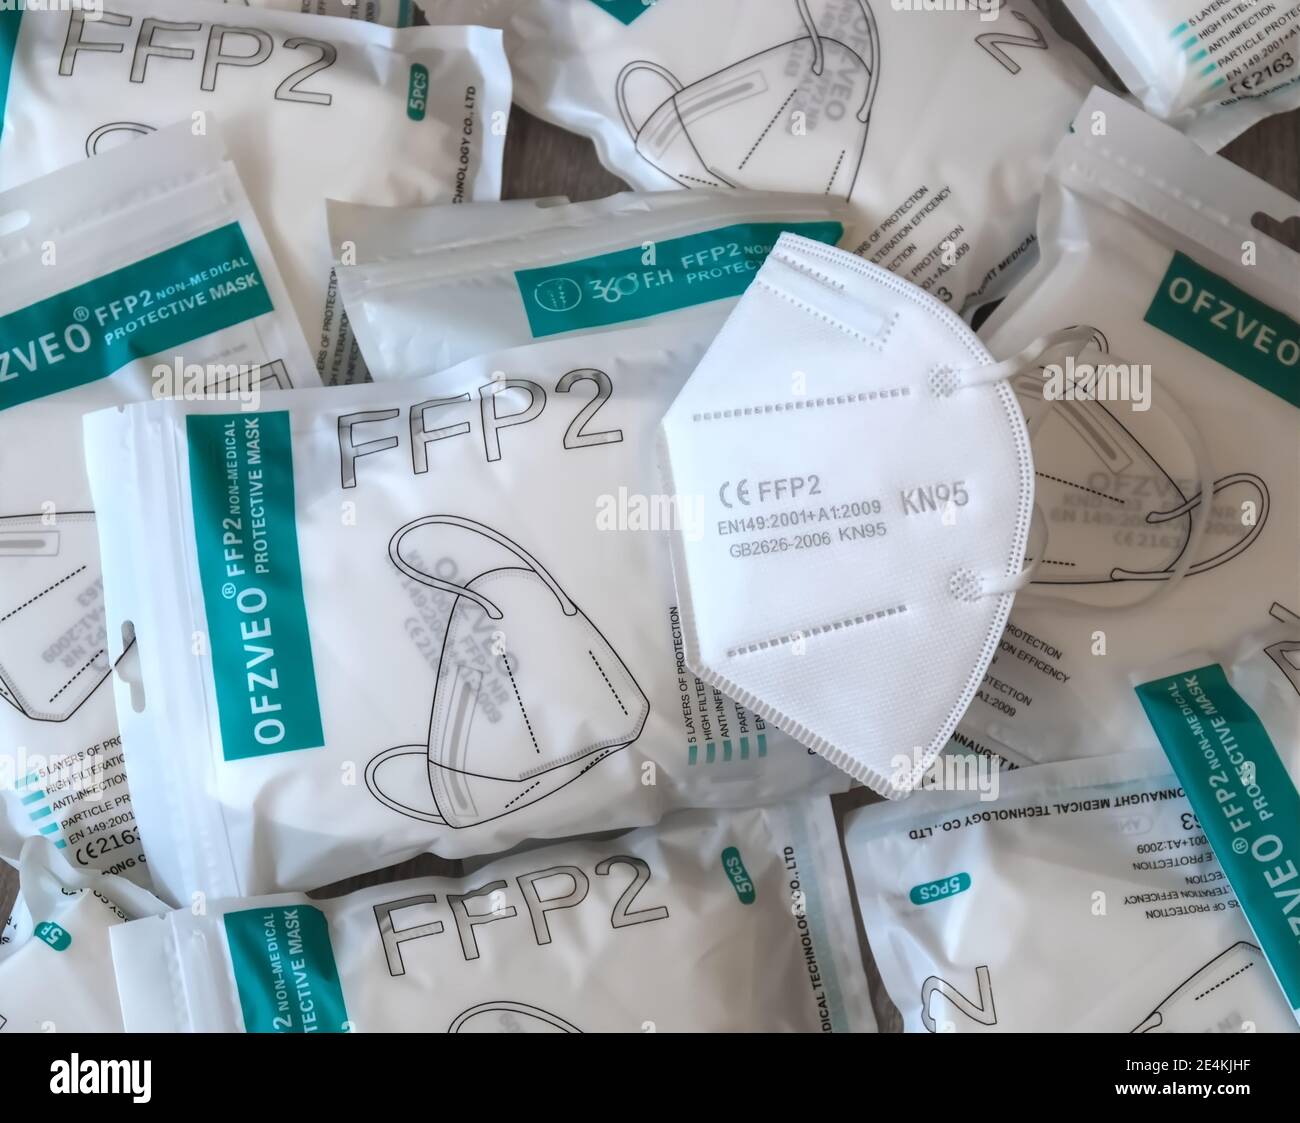 Many Packages with FFP2 protection masks to help against Corona pandemic Stock Photo